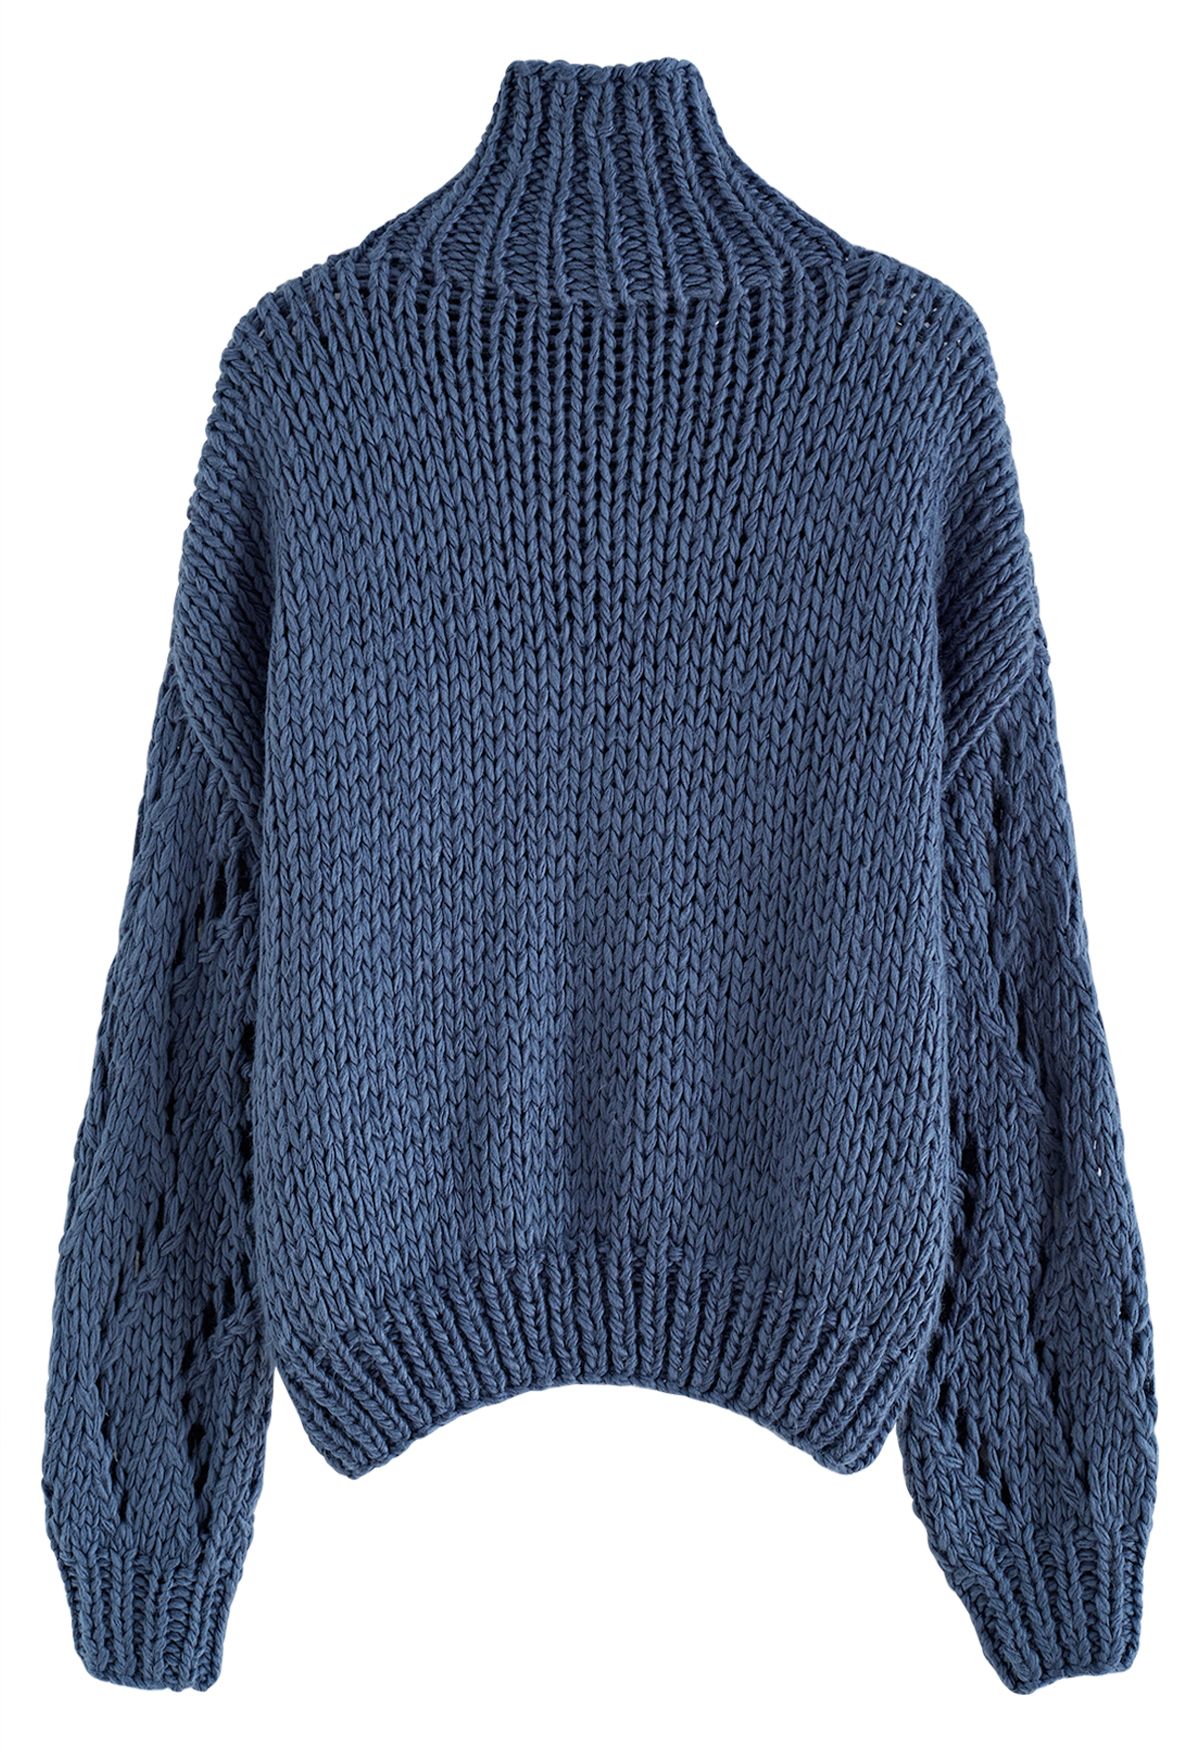 Pointelle Sleeve High Neck Hand-Knit Sweater in Dusty Blue